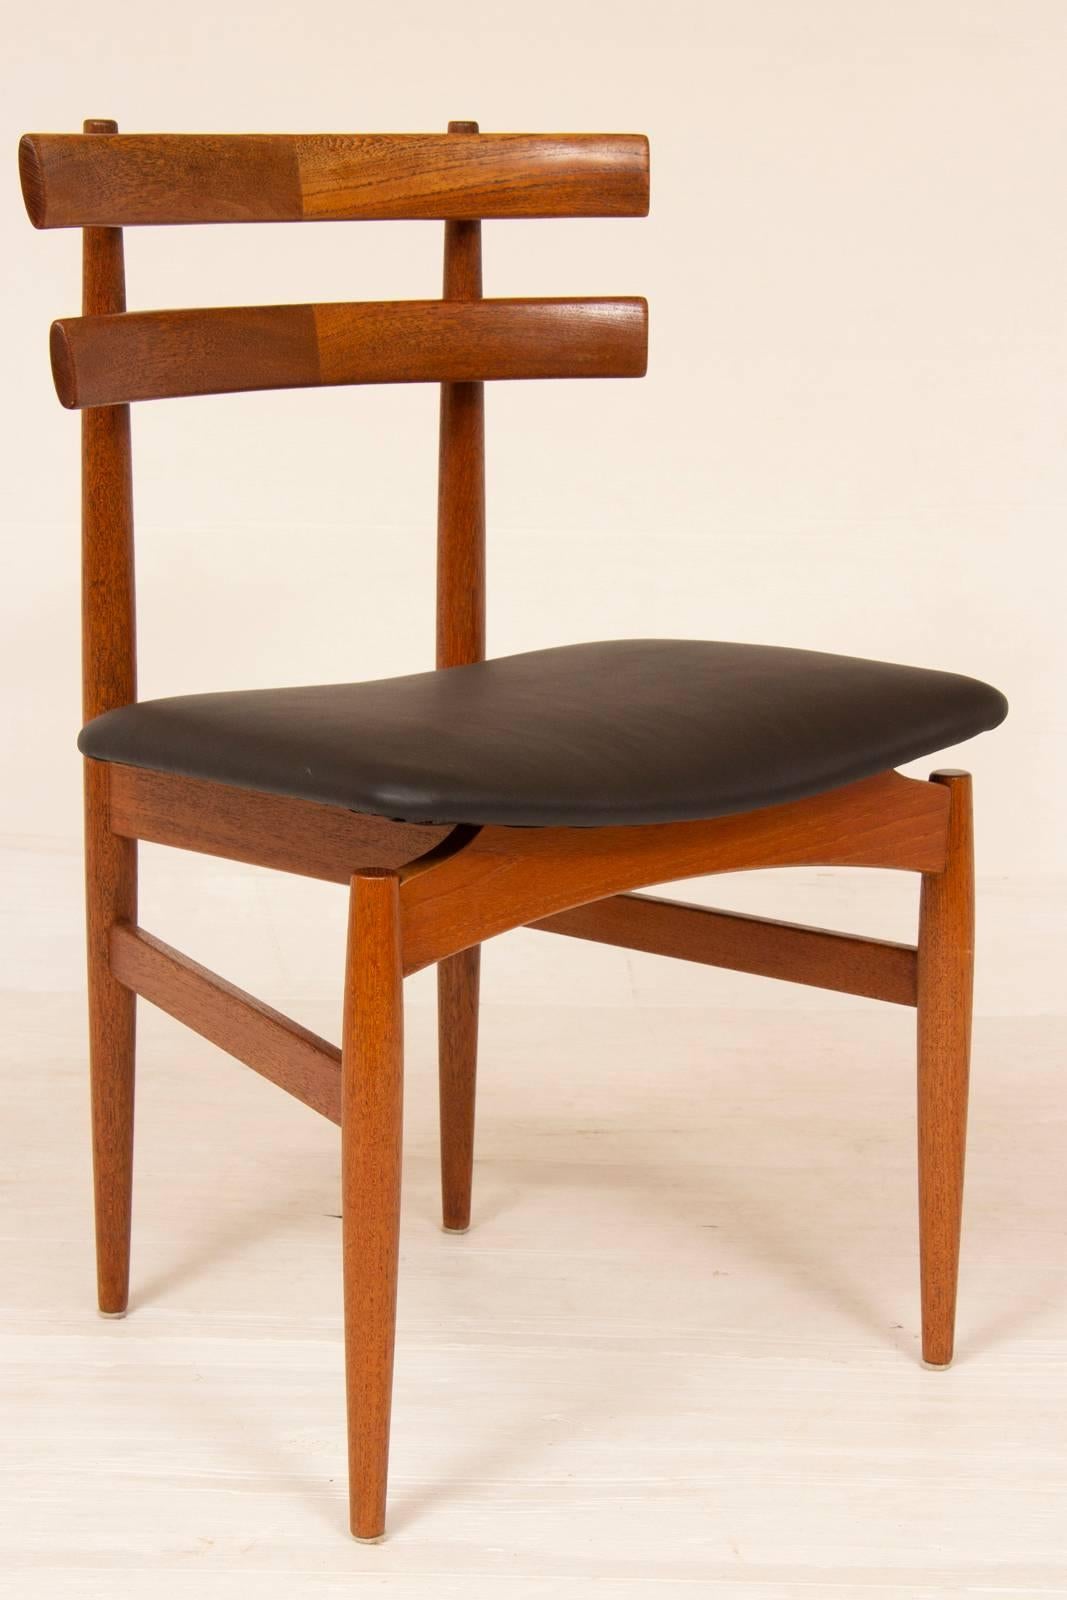 Set of 6 1950s Poul Hundevad for Hundevad Vamdrup teak dining chairs with feature two-rung curved ladder backrests. A well designed, stylish and unique design. Well made with tapered legs and curved feature back support supports. The seats have been